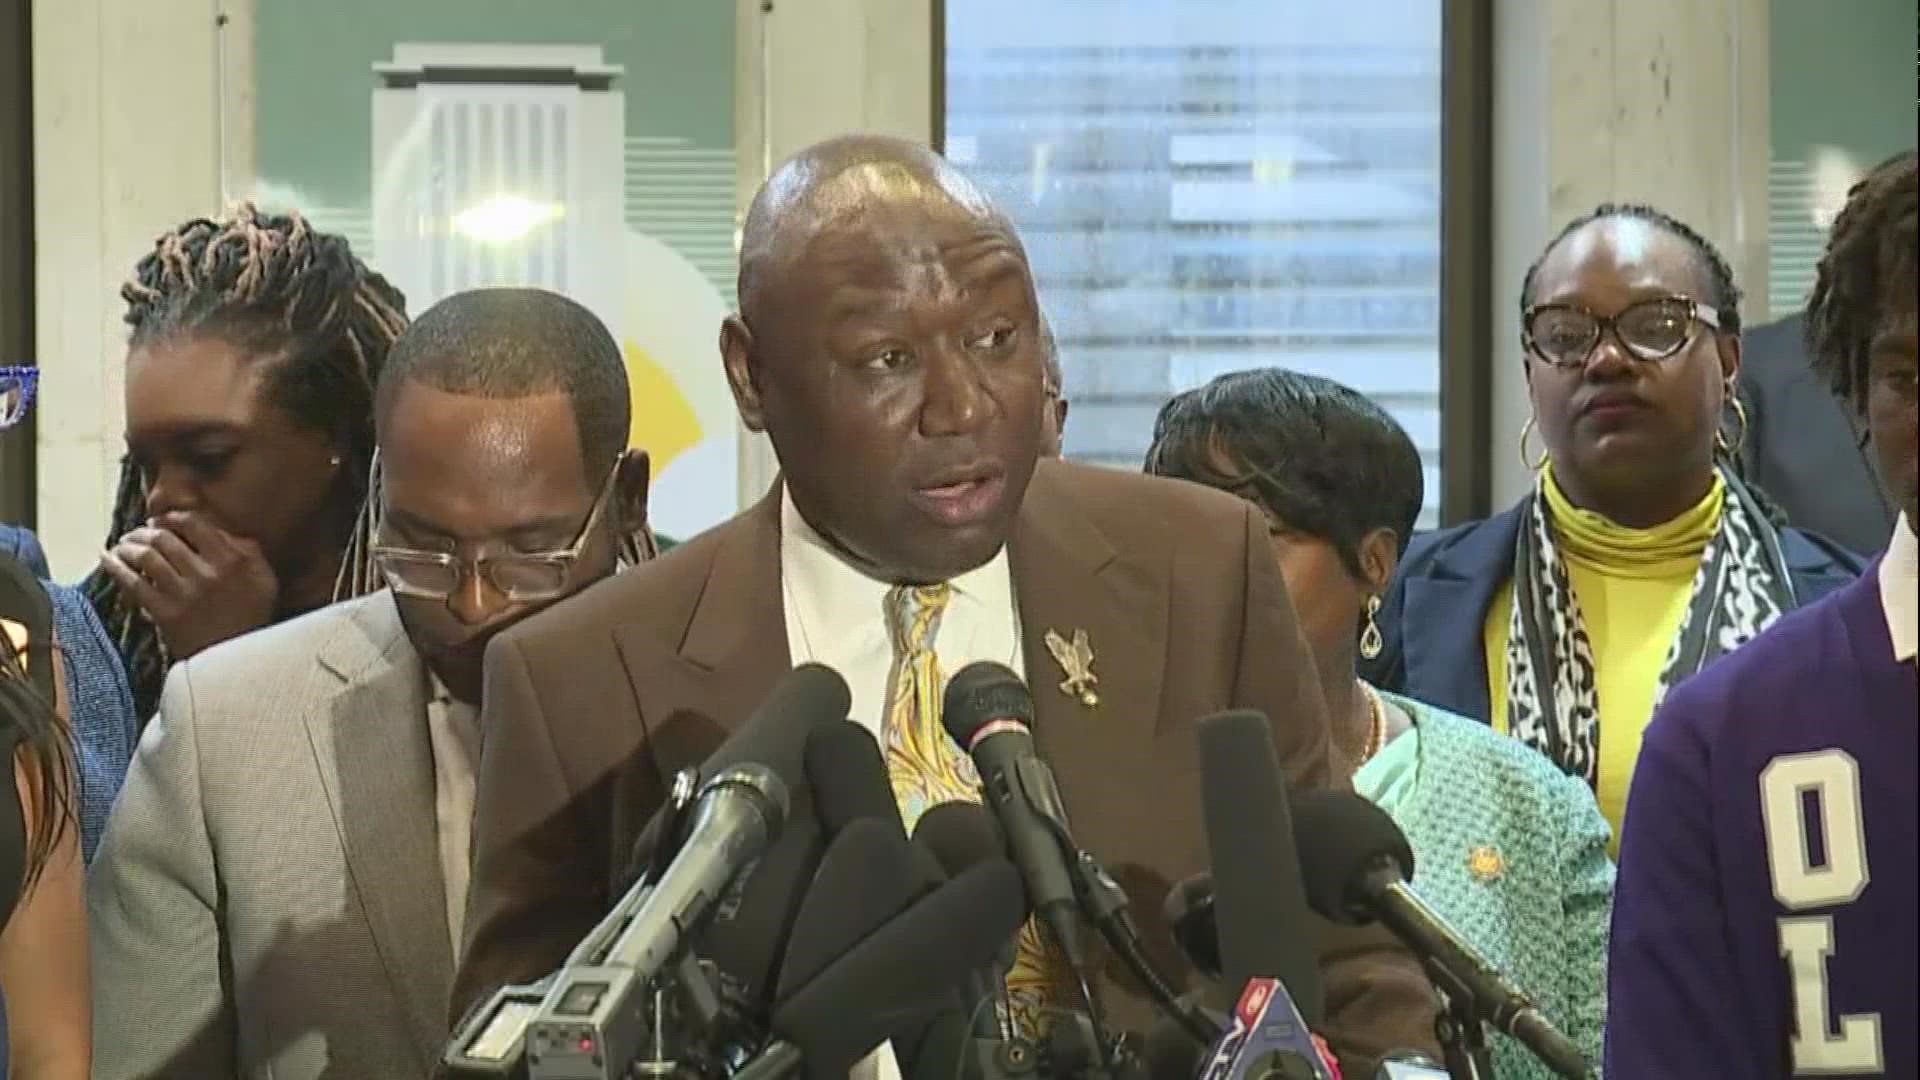 Ben Crump, elected officials and Black leaders gathered at the Fla. Capitol building Wednesday in protest of the rejection of an AP African American studies course.